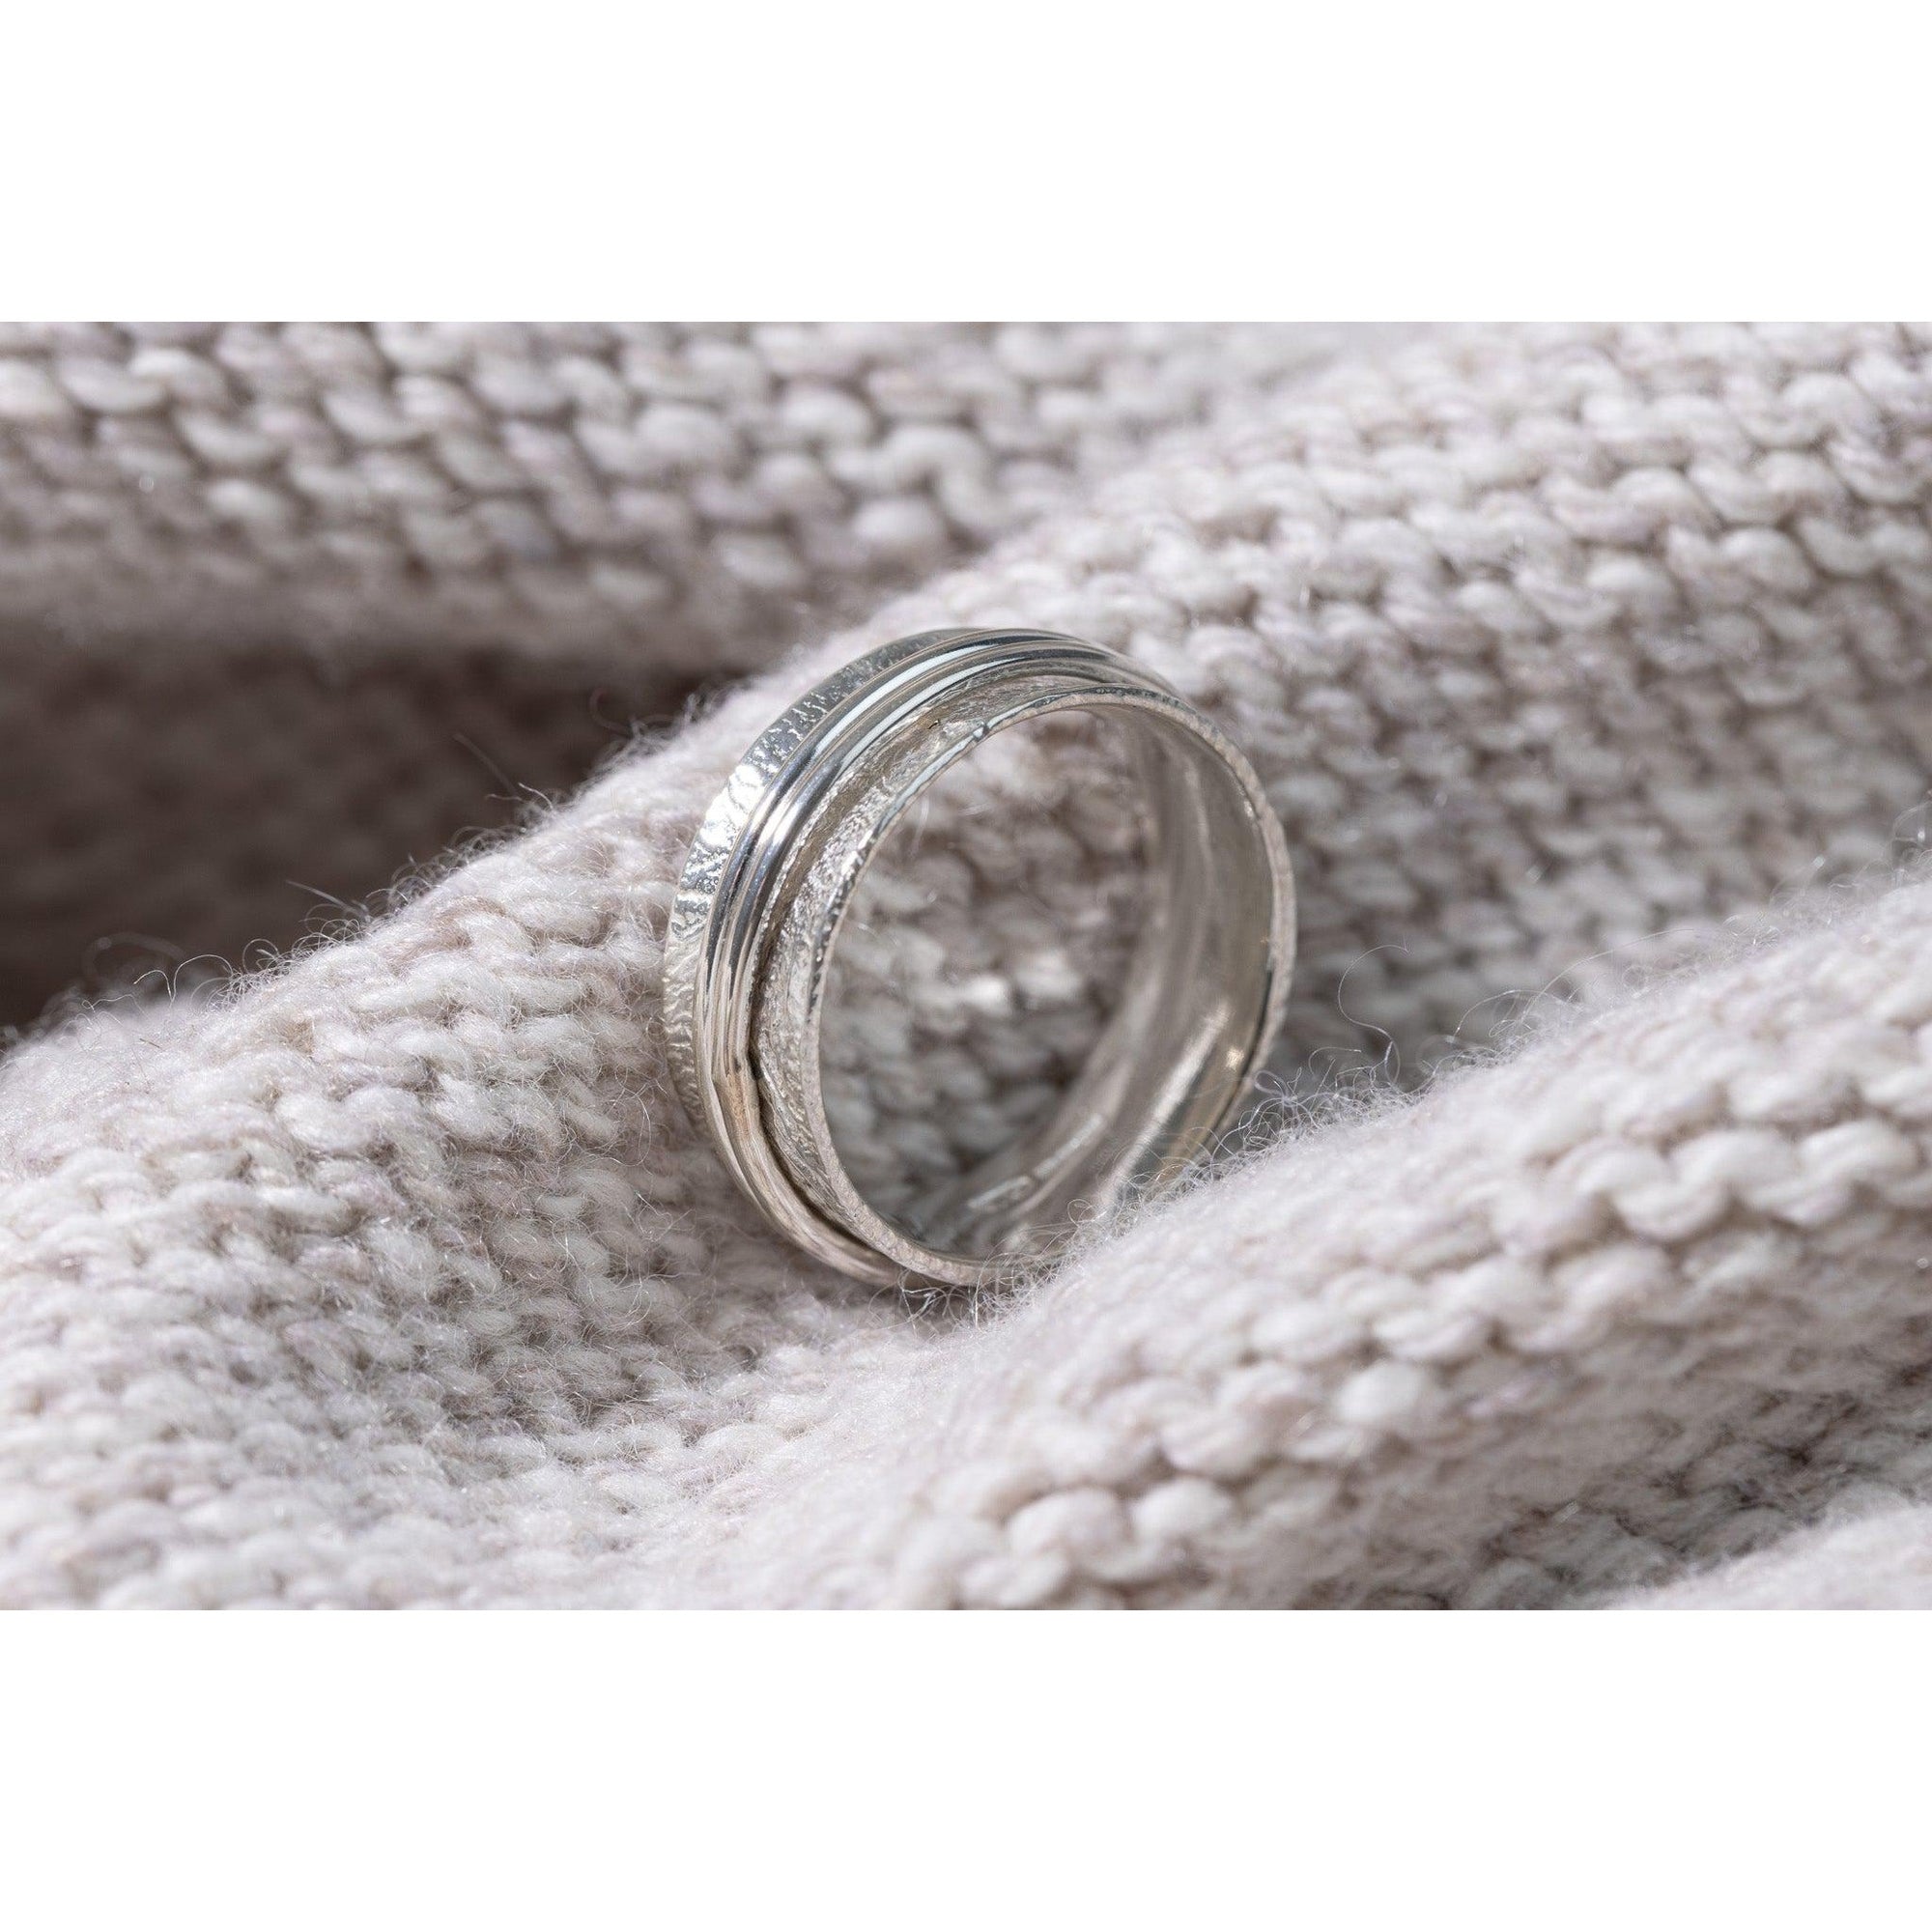 'LG52 - Silver Double 'Worry' Ring' by Les Grimshaw, available at Padstow Gallery, Cornwall